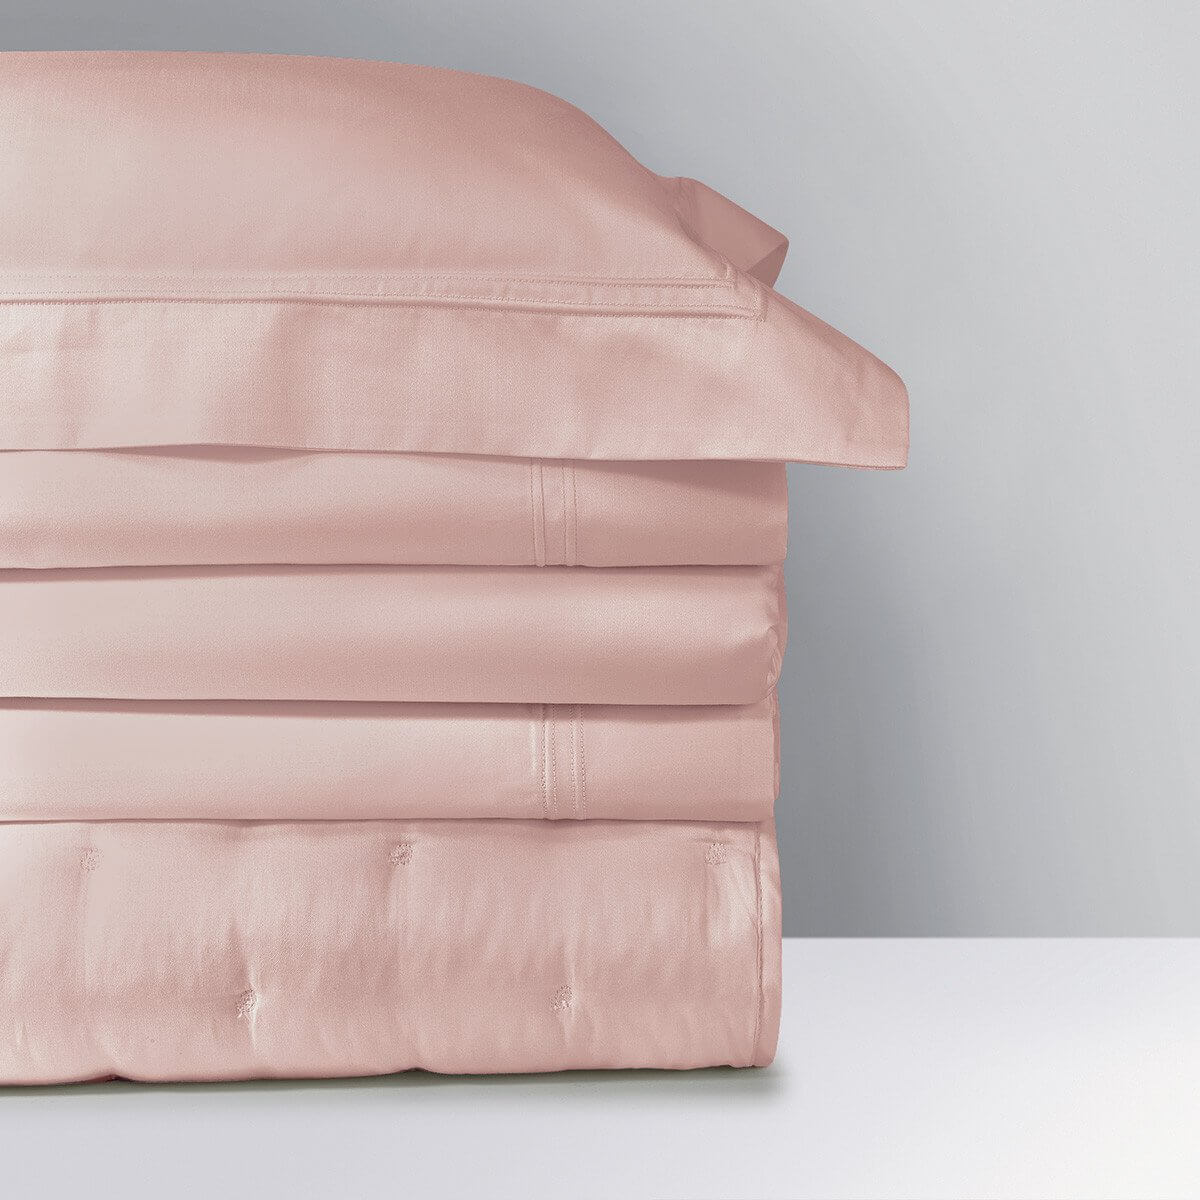 Yves Delorme Triomphe Duvet Covers and Shams